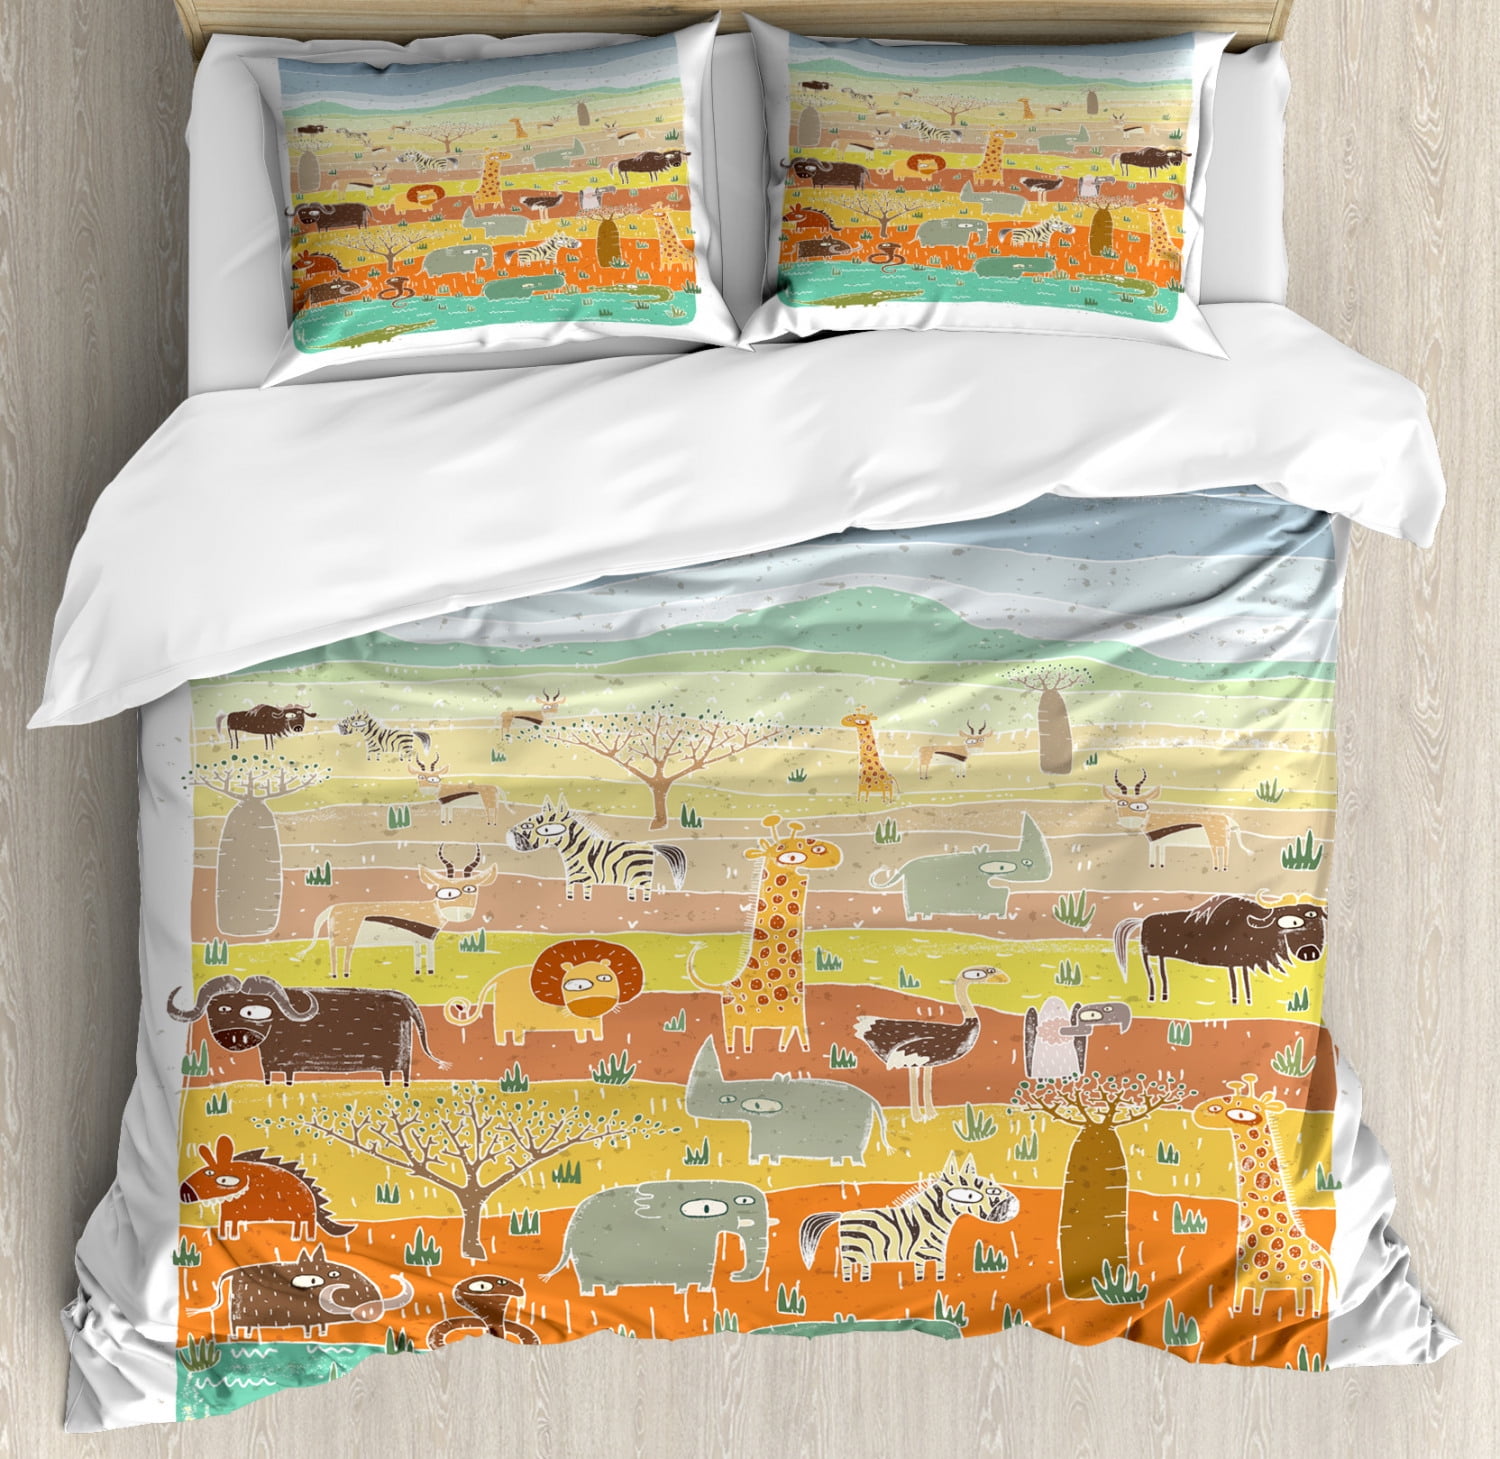 Kids Boys Queen Size Duvet Cover Set, African Savannah with Doodle Animals  Snake Giraffe Lion Boar Zebra and Crocodile, Decorative 3 Piece Bedding Set  with 2 Pillow Shams, Multicolor, by Ambesonne - Walmart.com